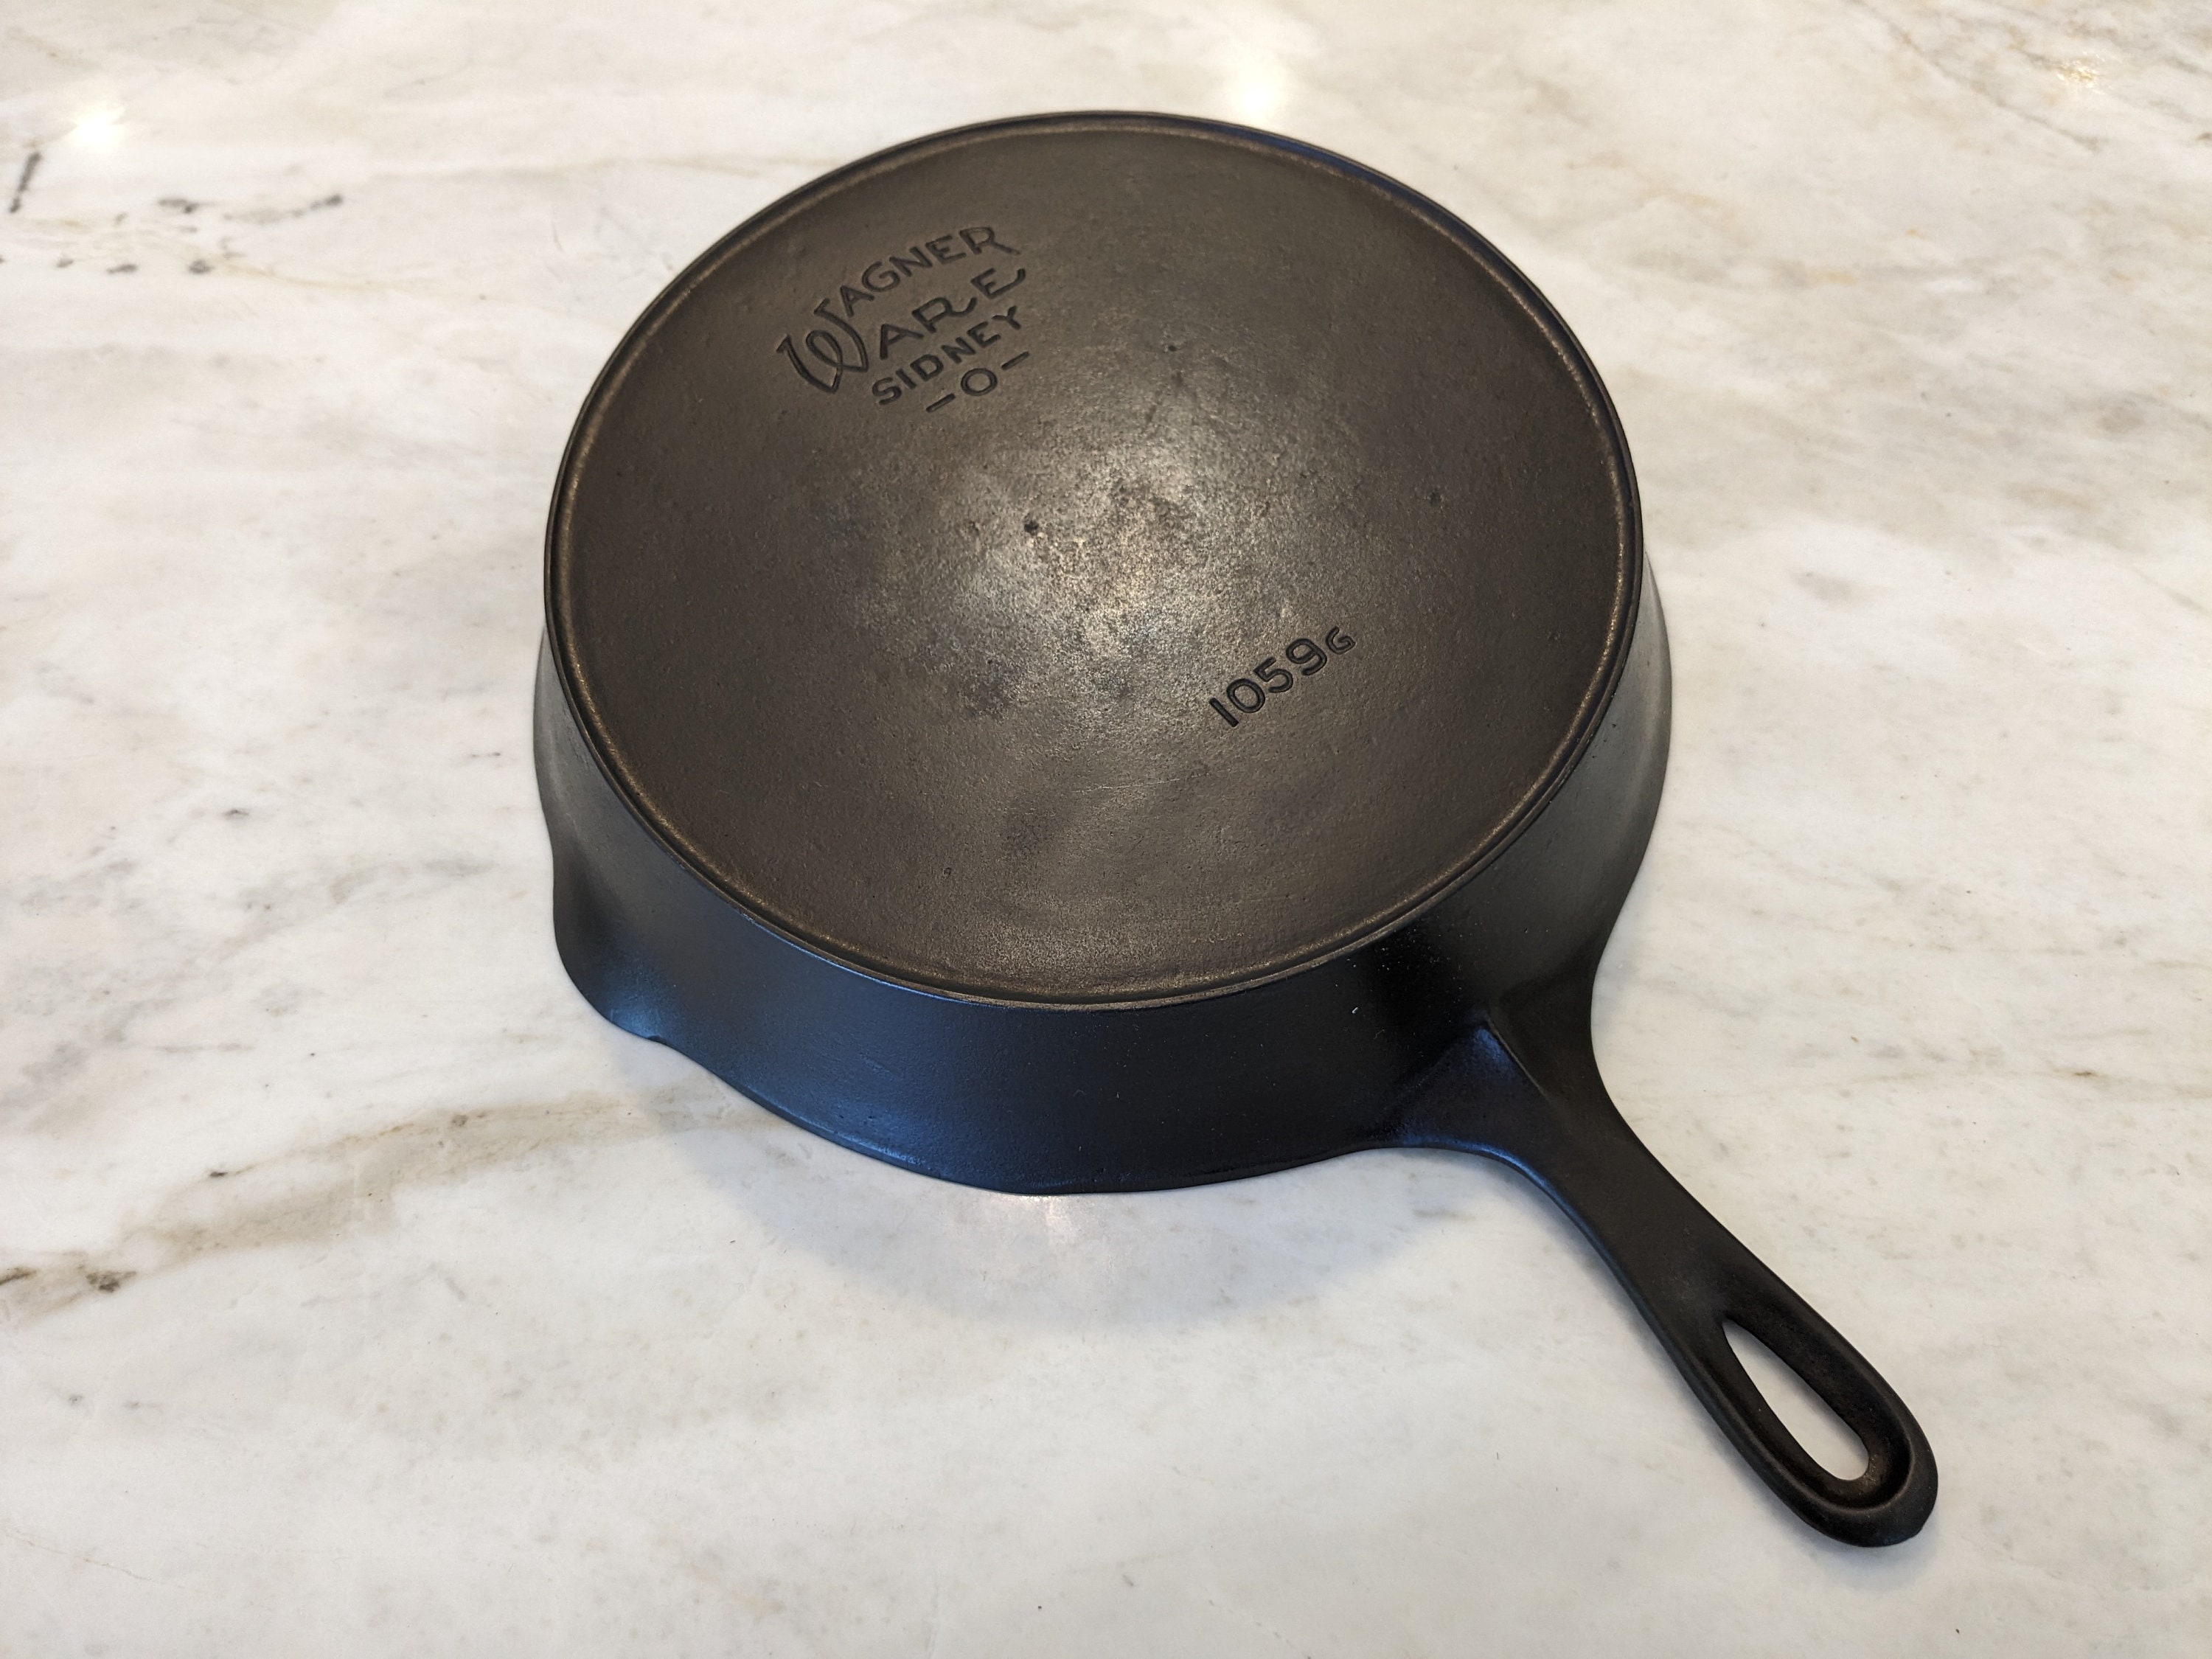 wagner ware – What's up Homer Skillet?